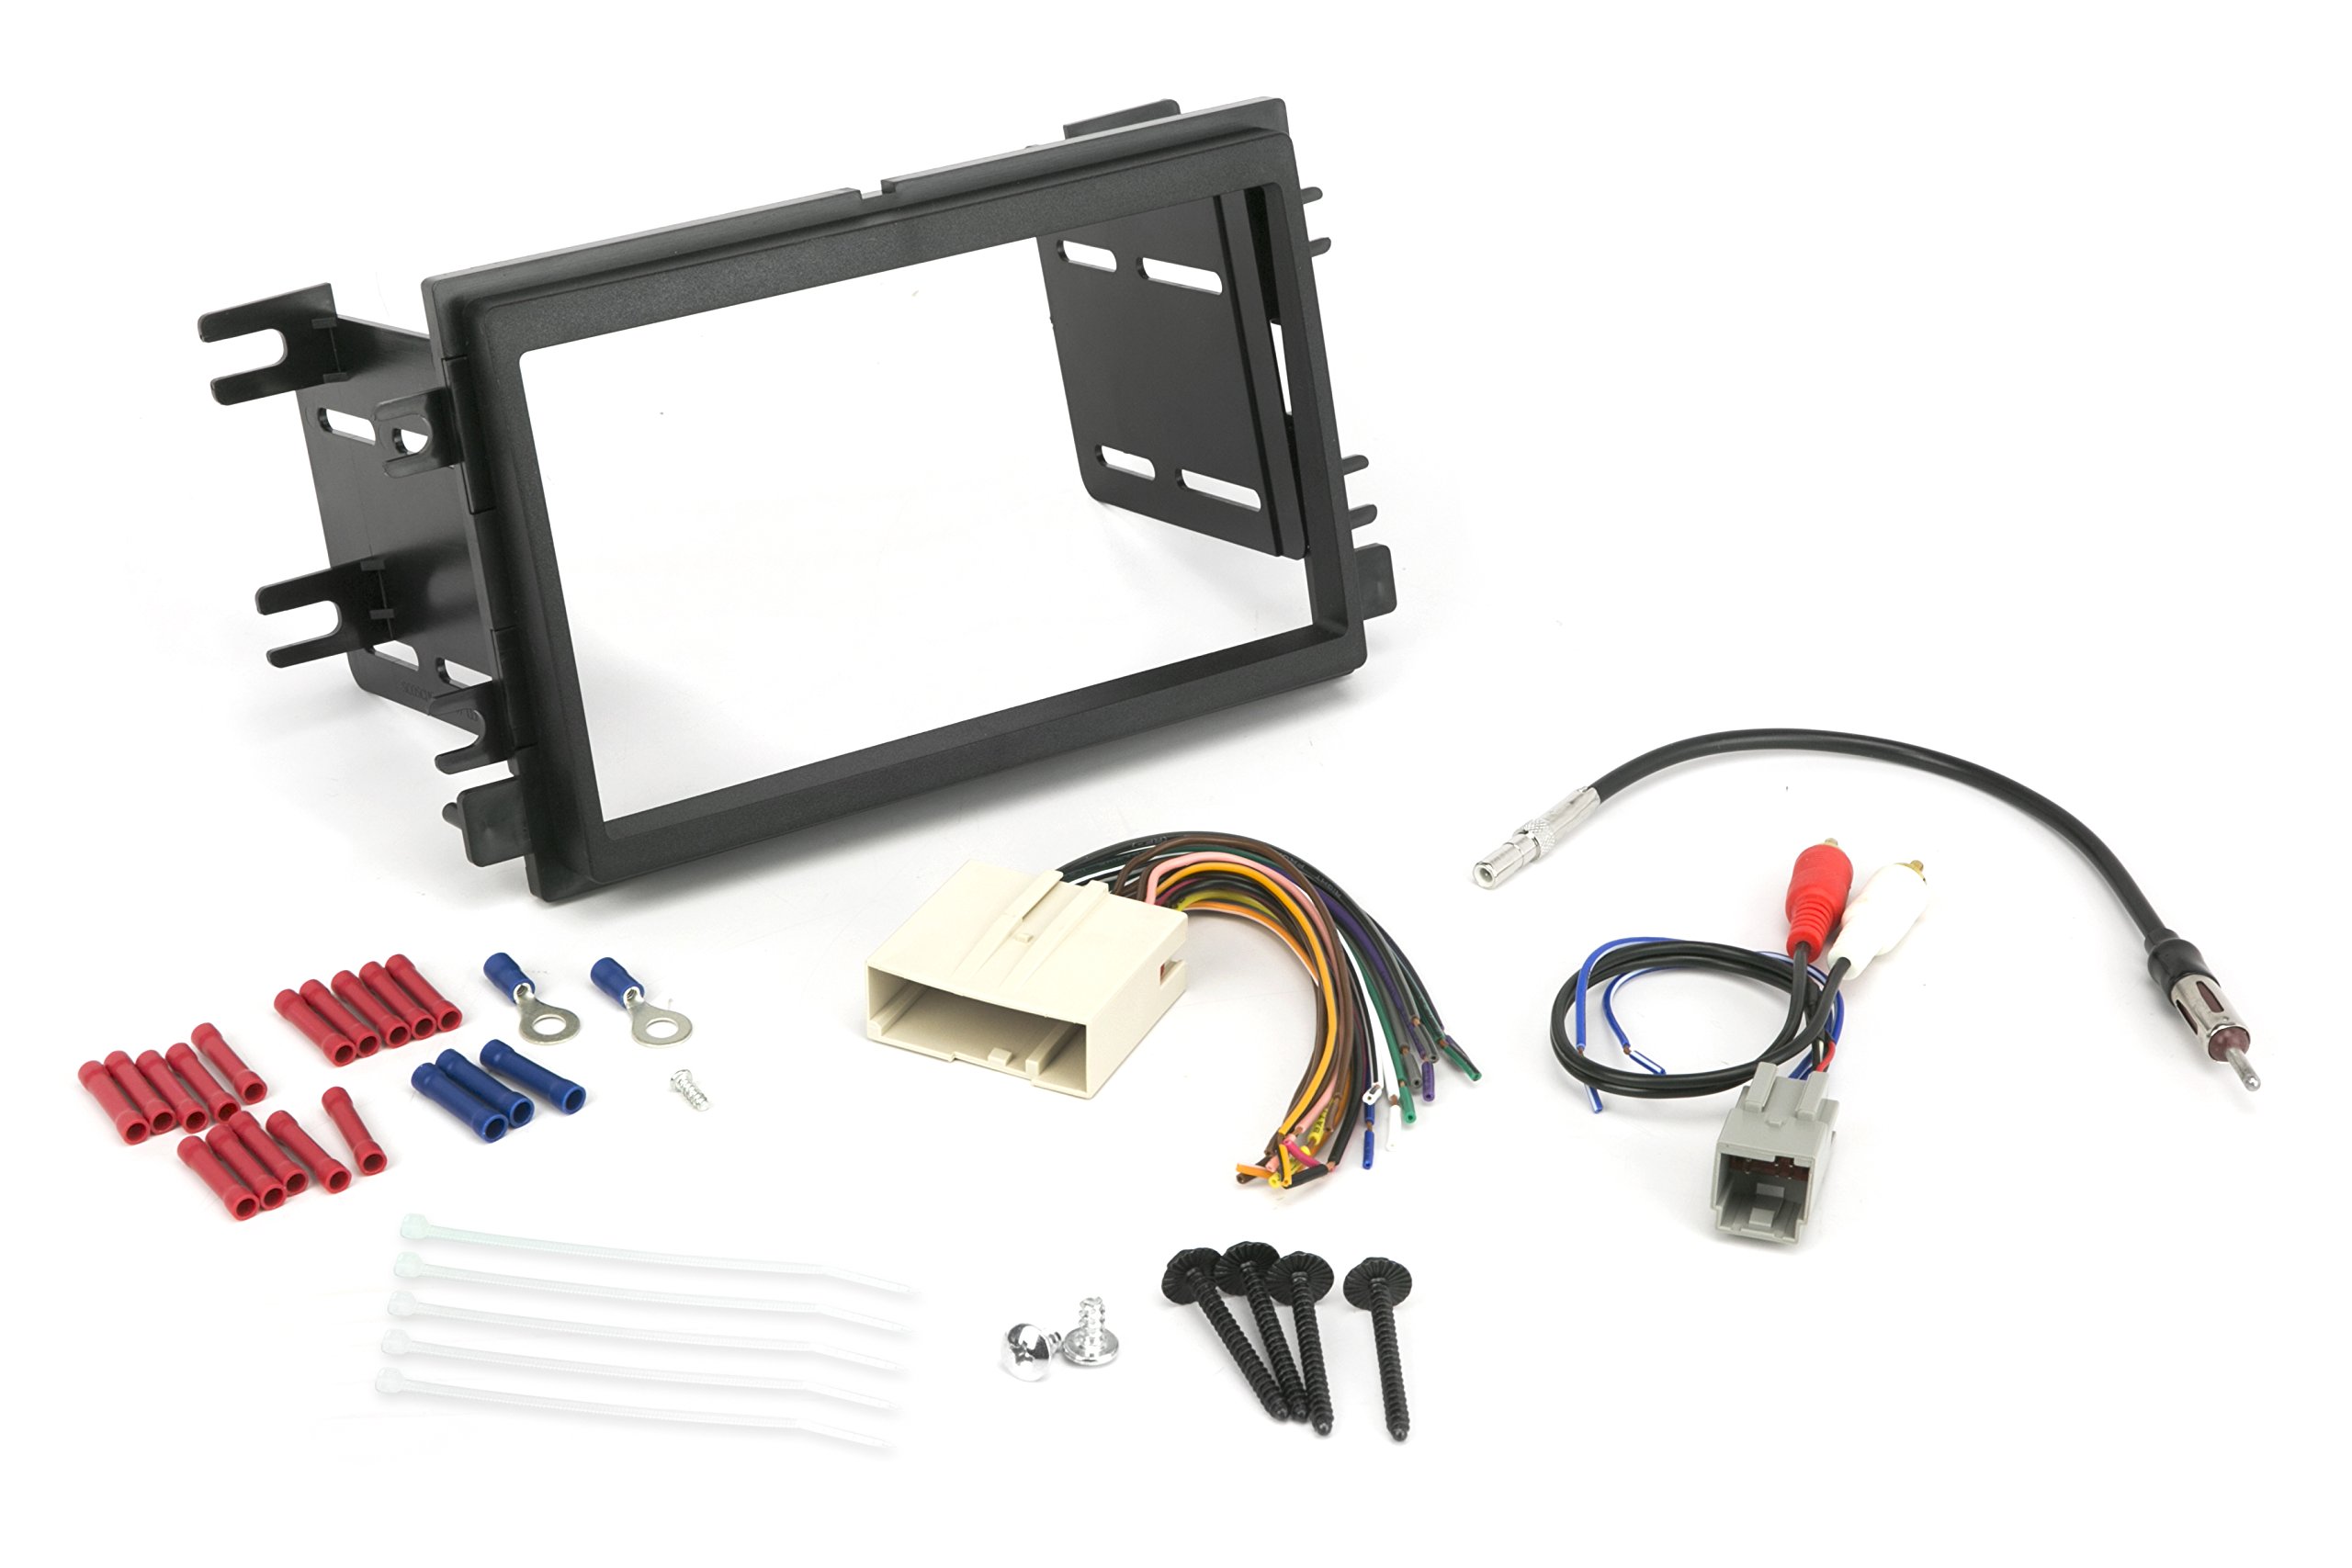 SCOSCHE Install Centric ICFD6BN Complete Basic Installation Solution For Installing A Double DIN Aftermarket Stereo Compatible With Select 2004-12 Premium Sound Ford, Lincoln And Mercury Vehicles